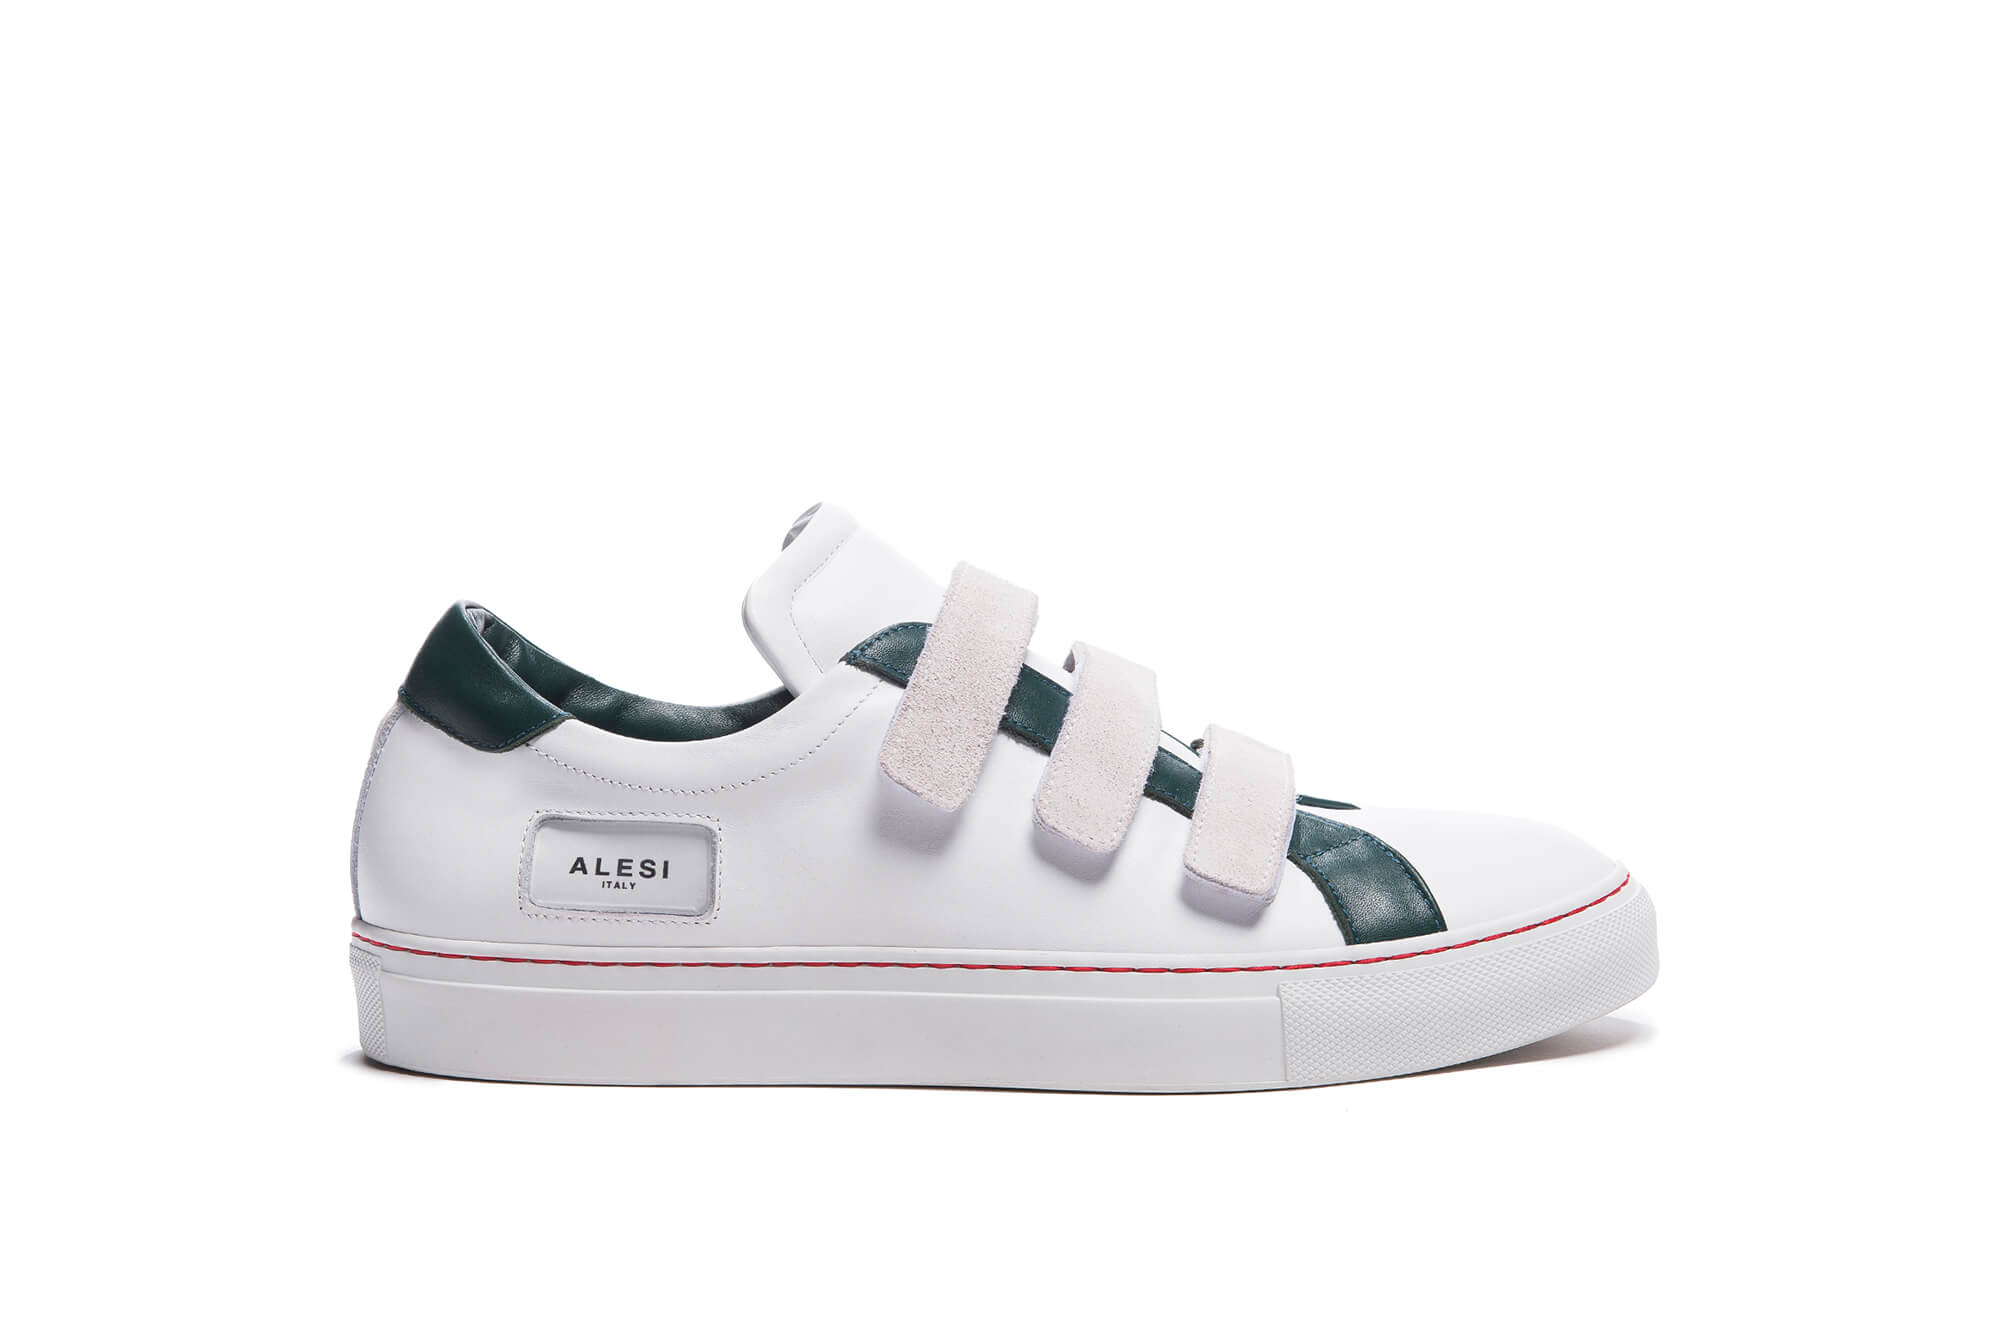 ALESI LUX STRAP customized made in Italy sneakers by Lonanthony Parker